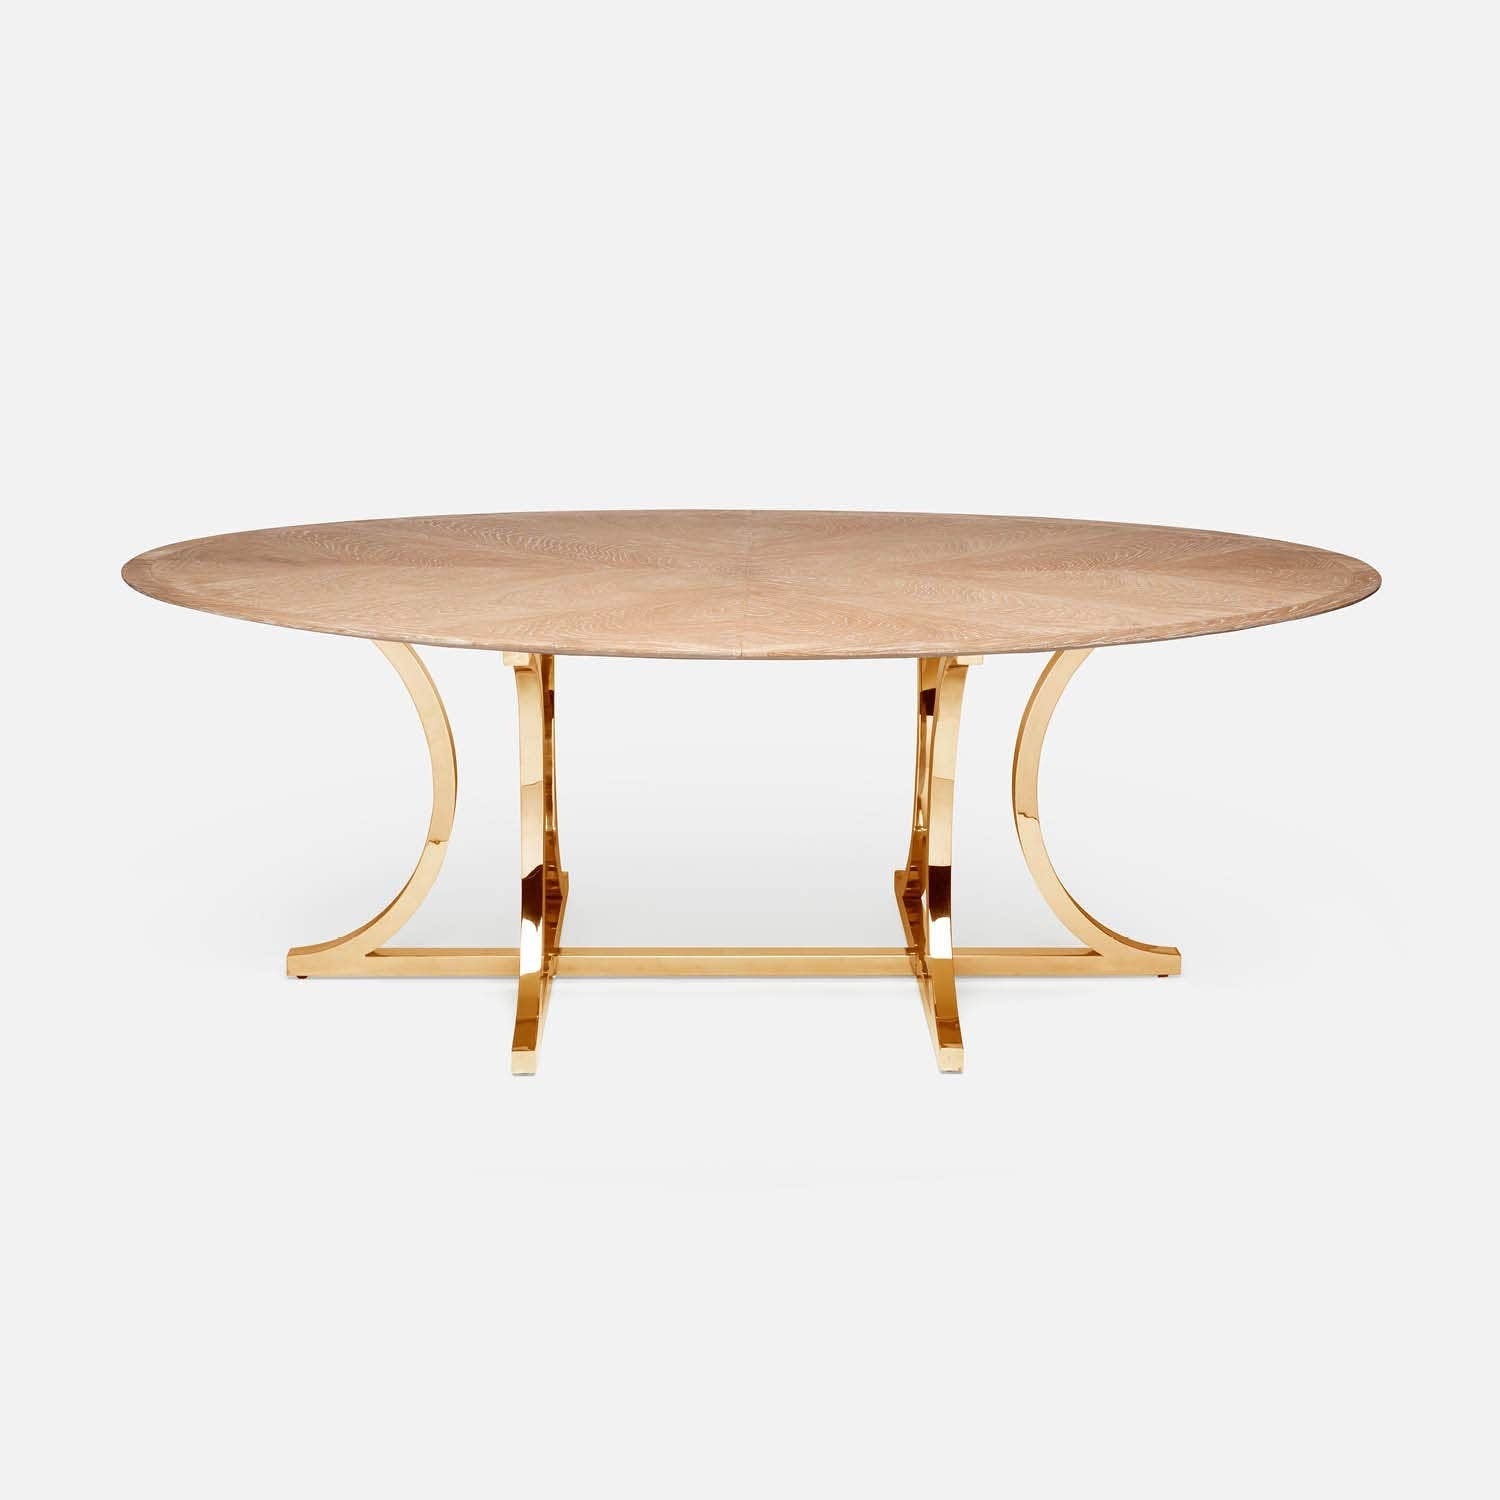 Made Goods Leighton 84" x 42" x 30" Polished Gold Steel Dinning Table With Oval White Cerused Oak Table Top